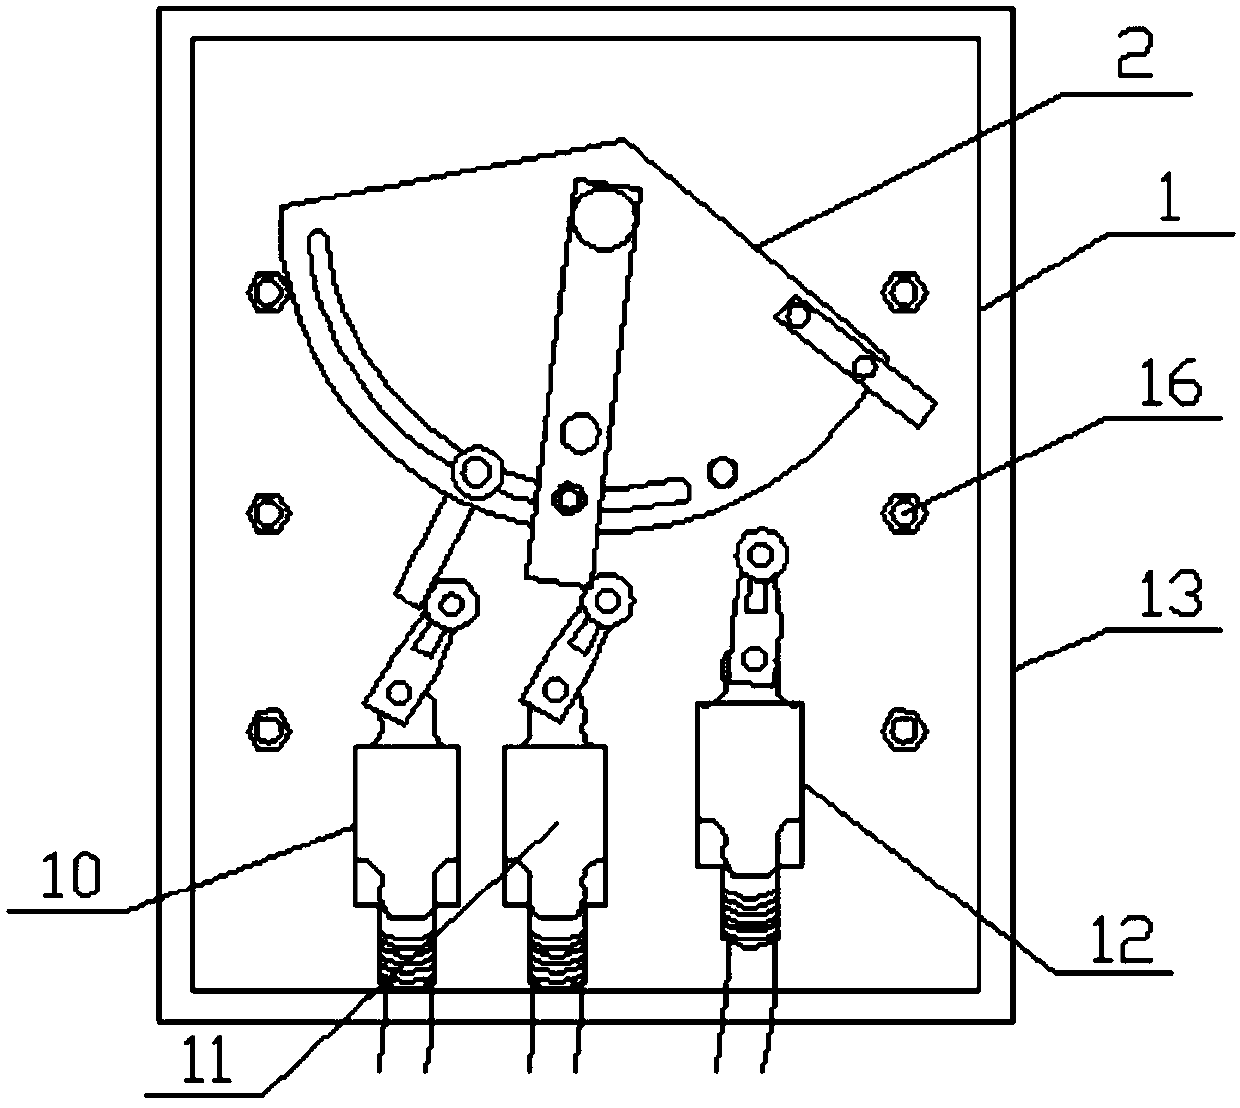 Main steam door switch in-place feedback structure